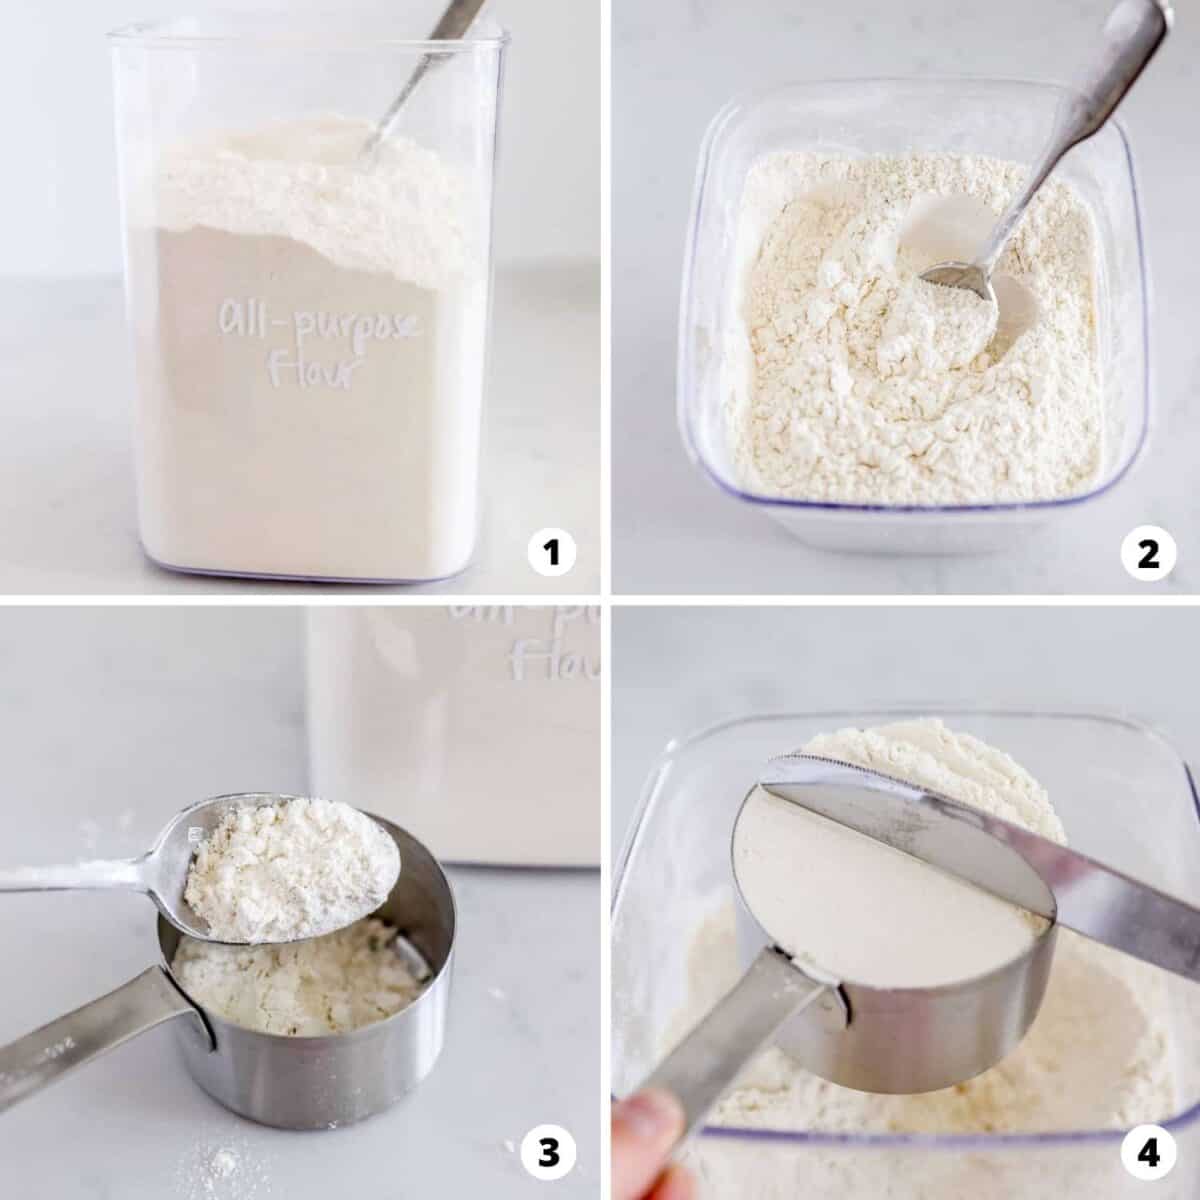 The process of measuring flour in a 4 step collage.